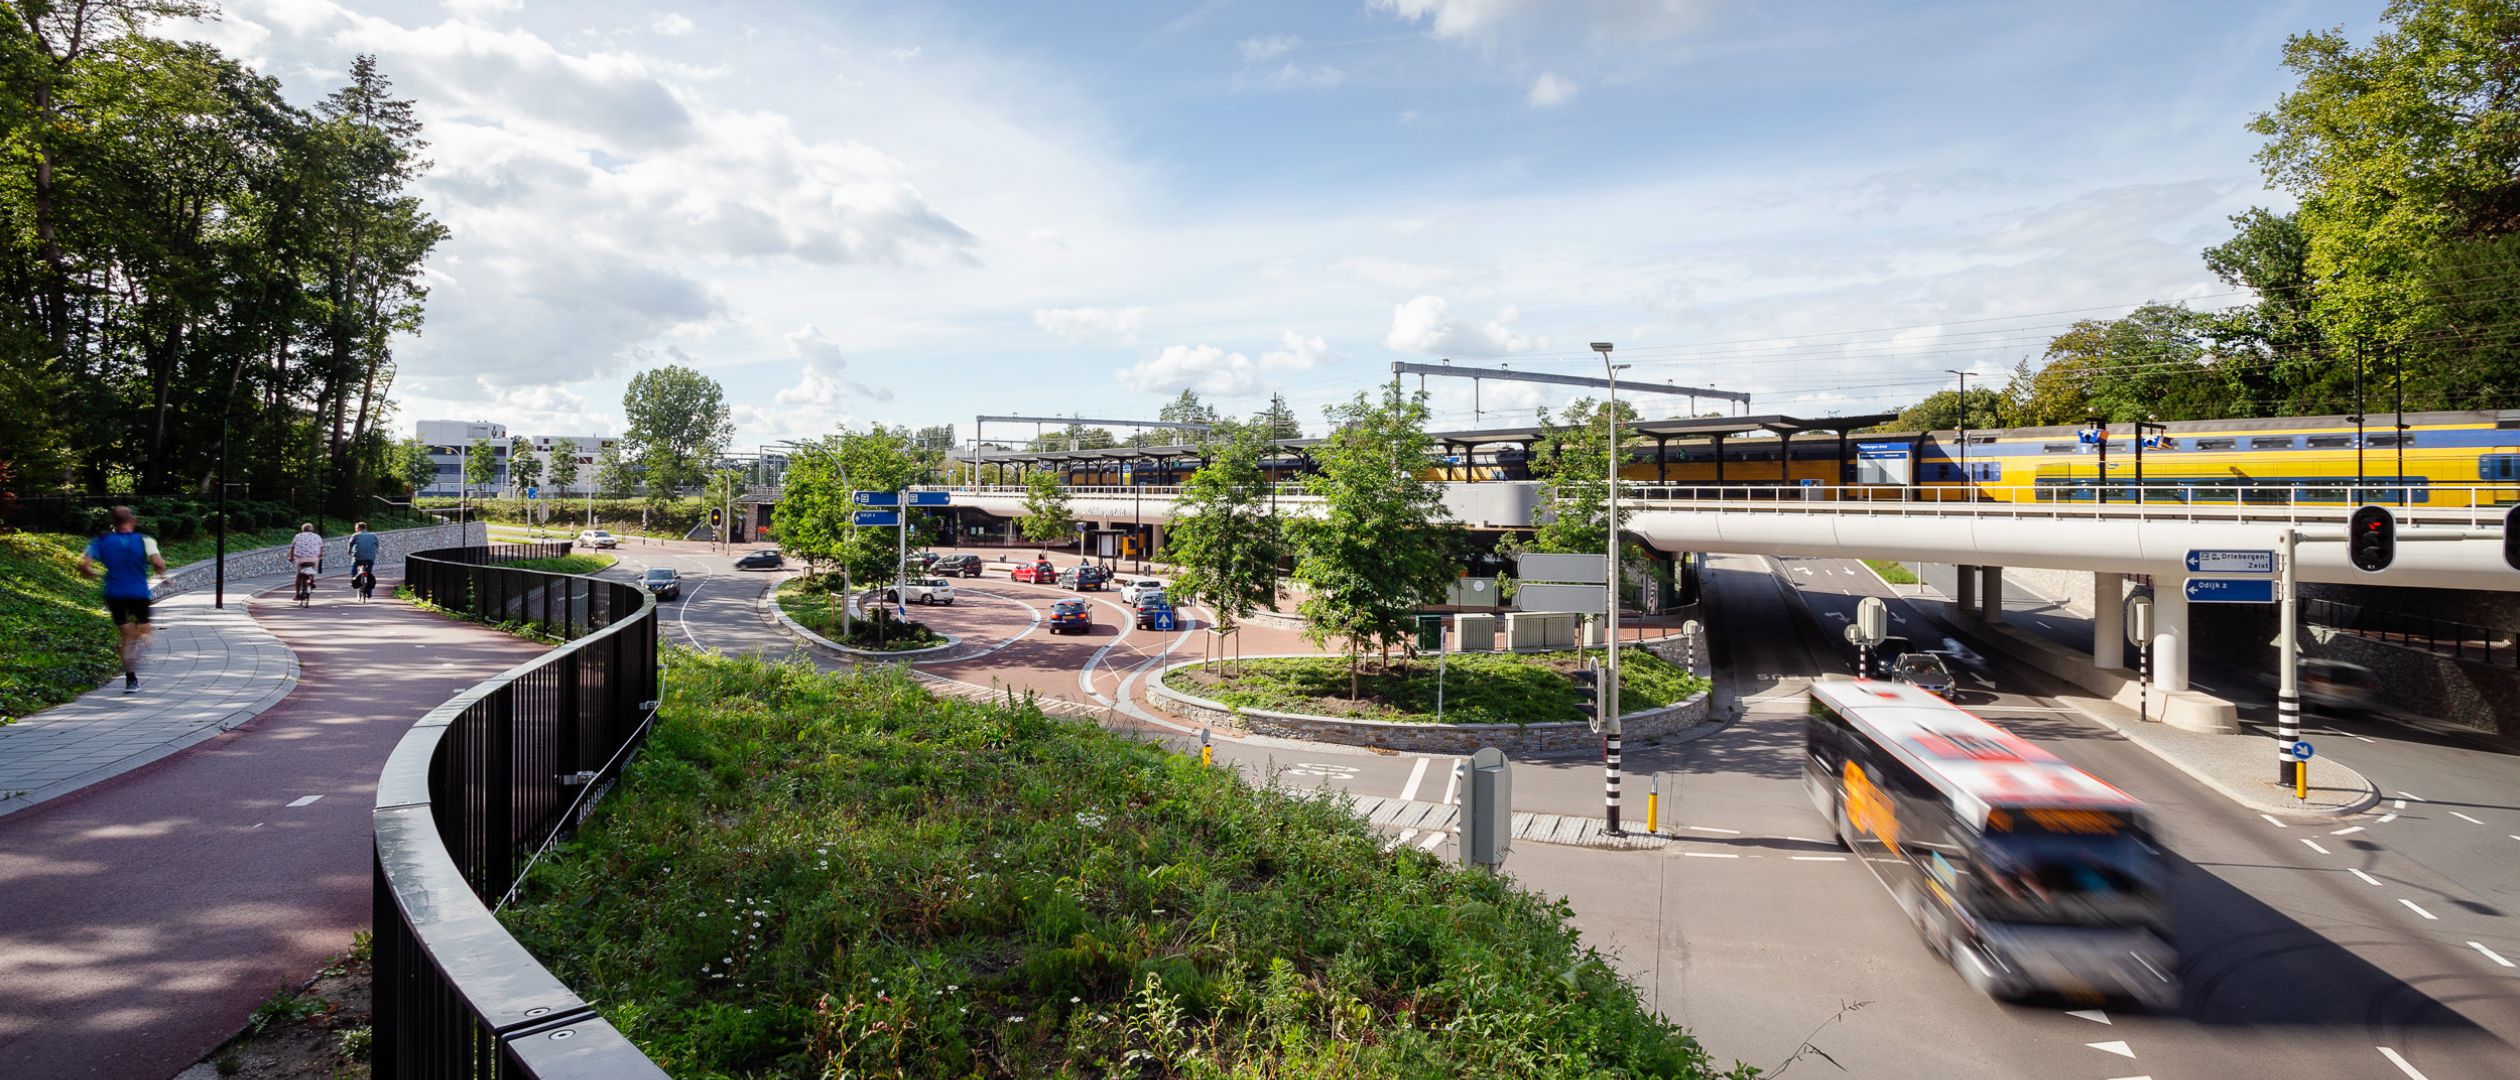 Station Square and Station Environment, Driebergen-Zeist